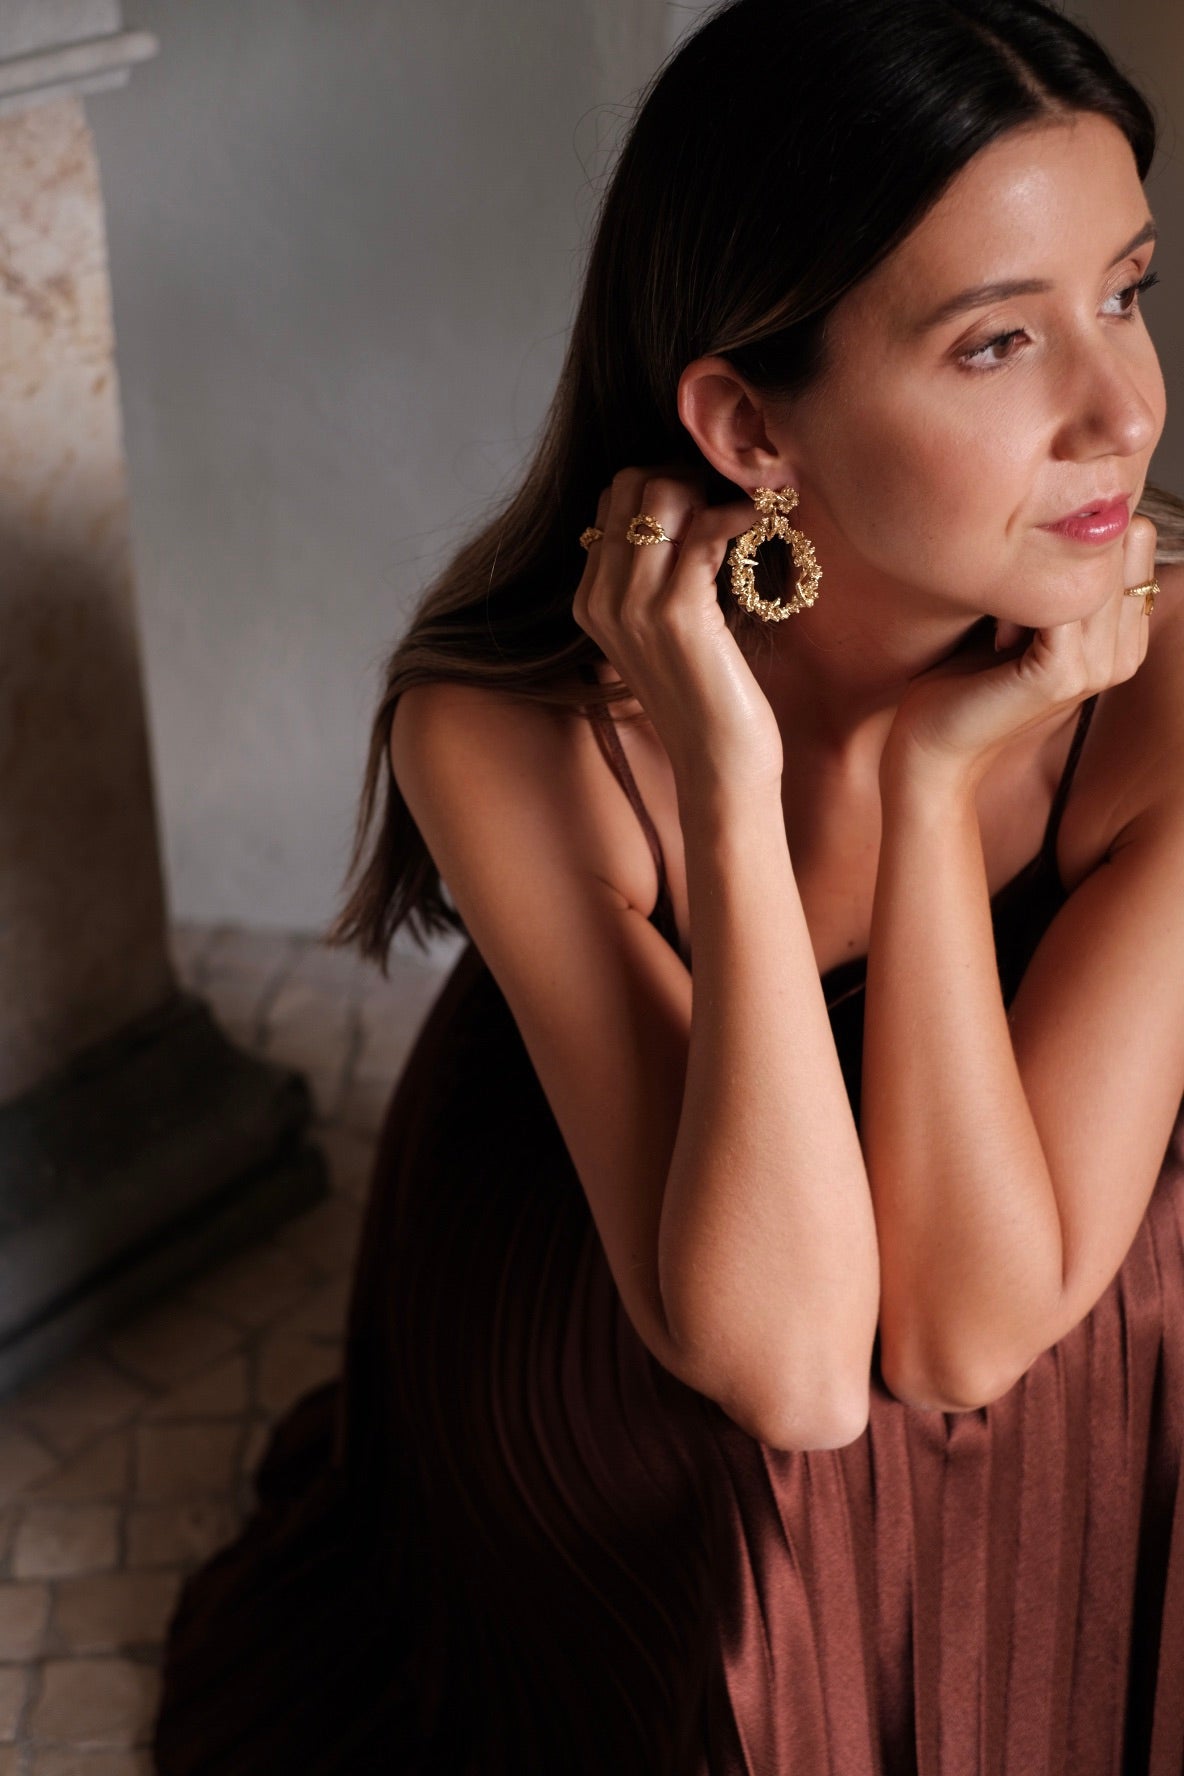 A woman in a brown dress is posing for a photo, showcasing her opulence with the stunning Cremilde Bispo Jewellery's Garden's Delight II GP earring set.